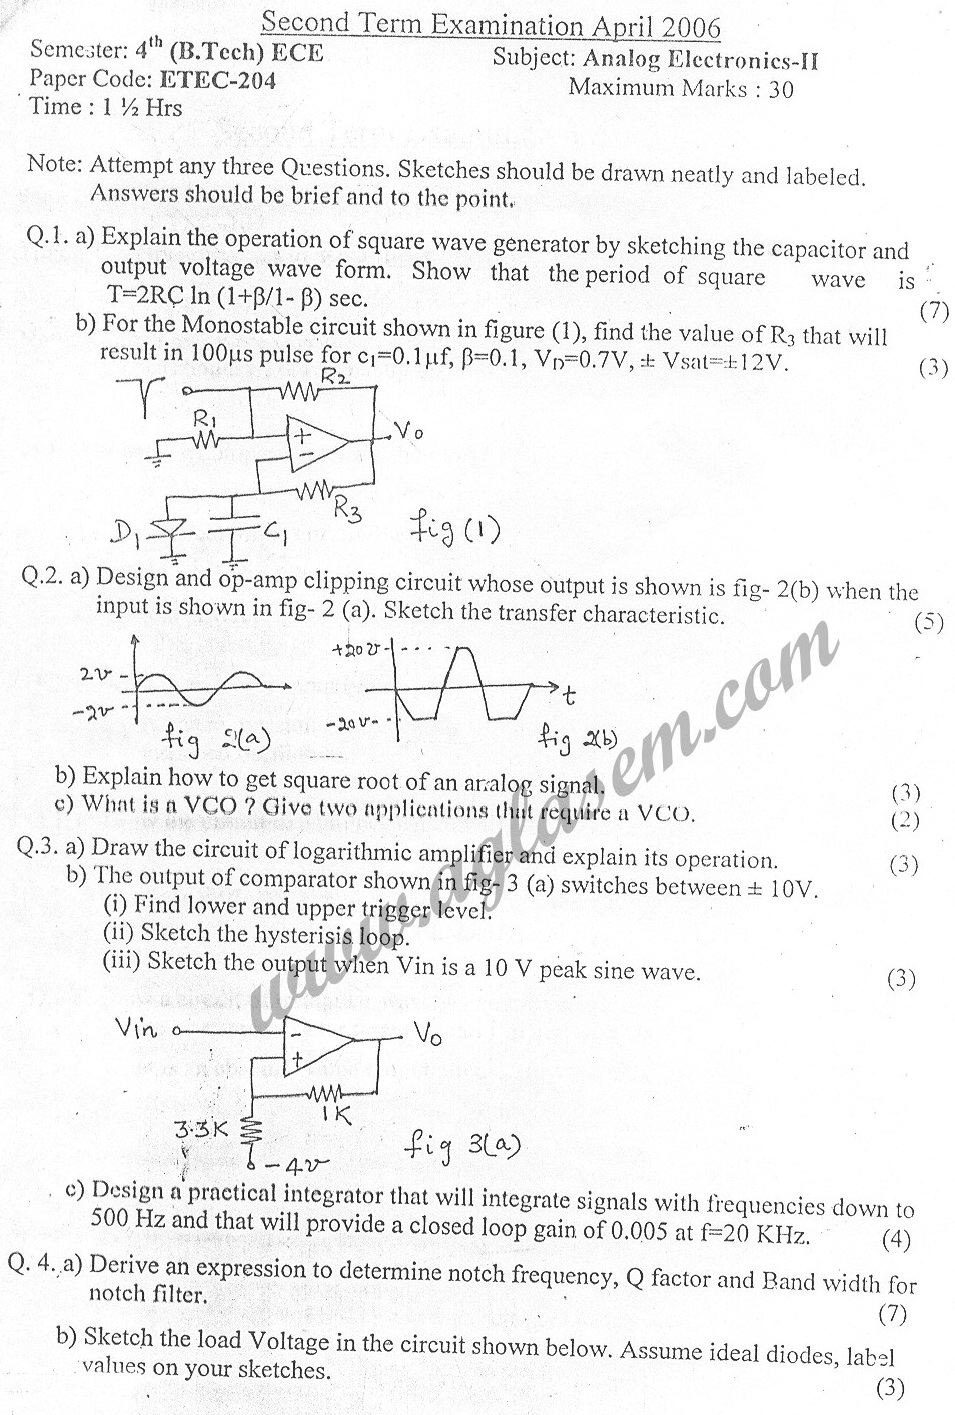 GGSIPU Question Papers Fourth Semester  Second Term 2006  ETEC-204